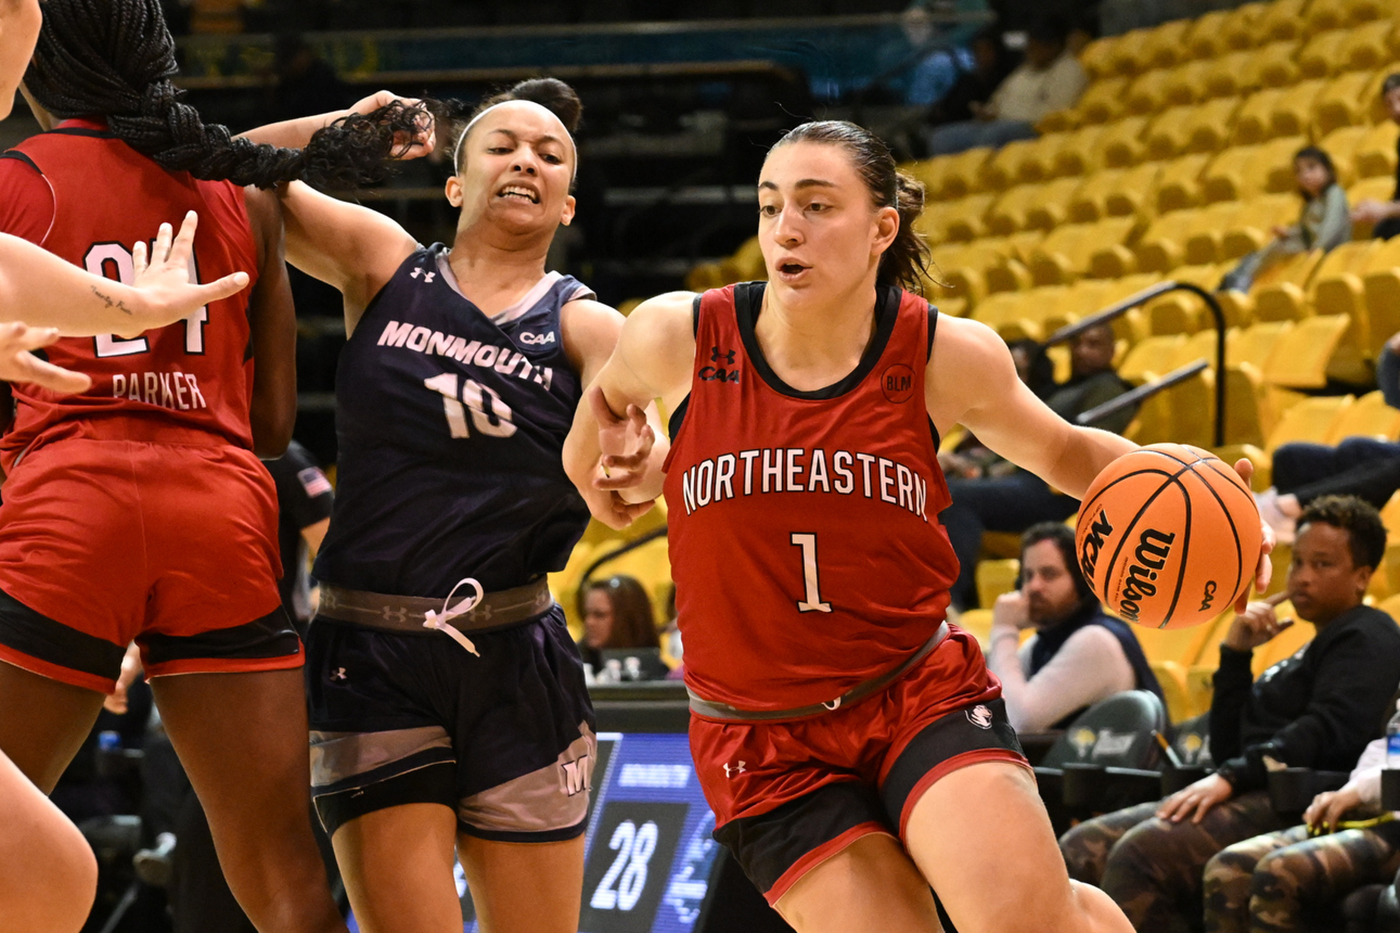 northeastern womens basketball player dribbles the ball while holding off a monmouth player